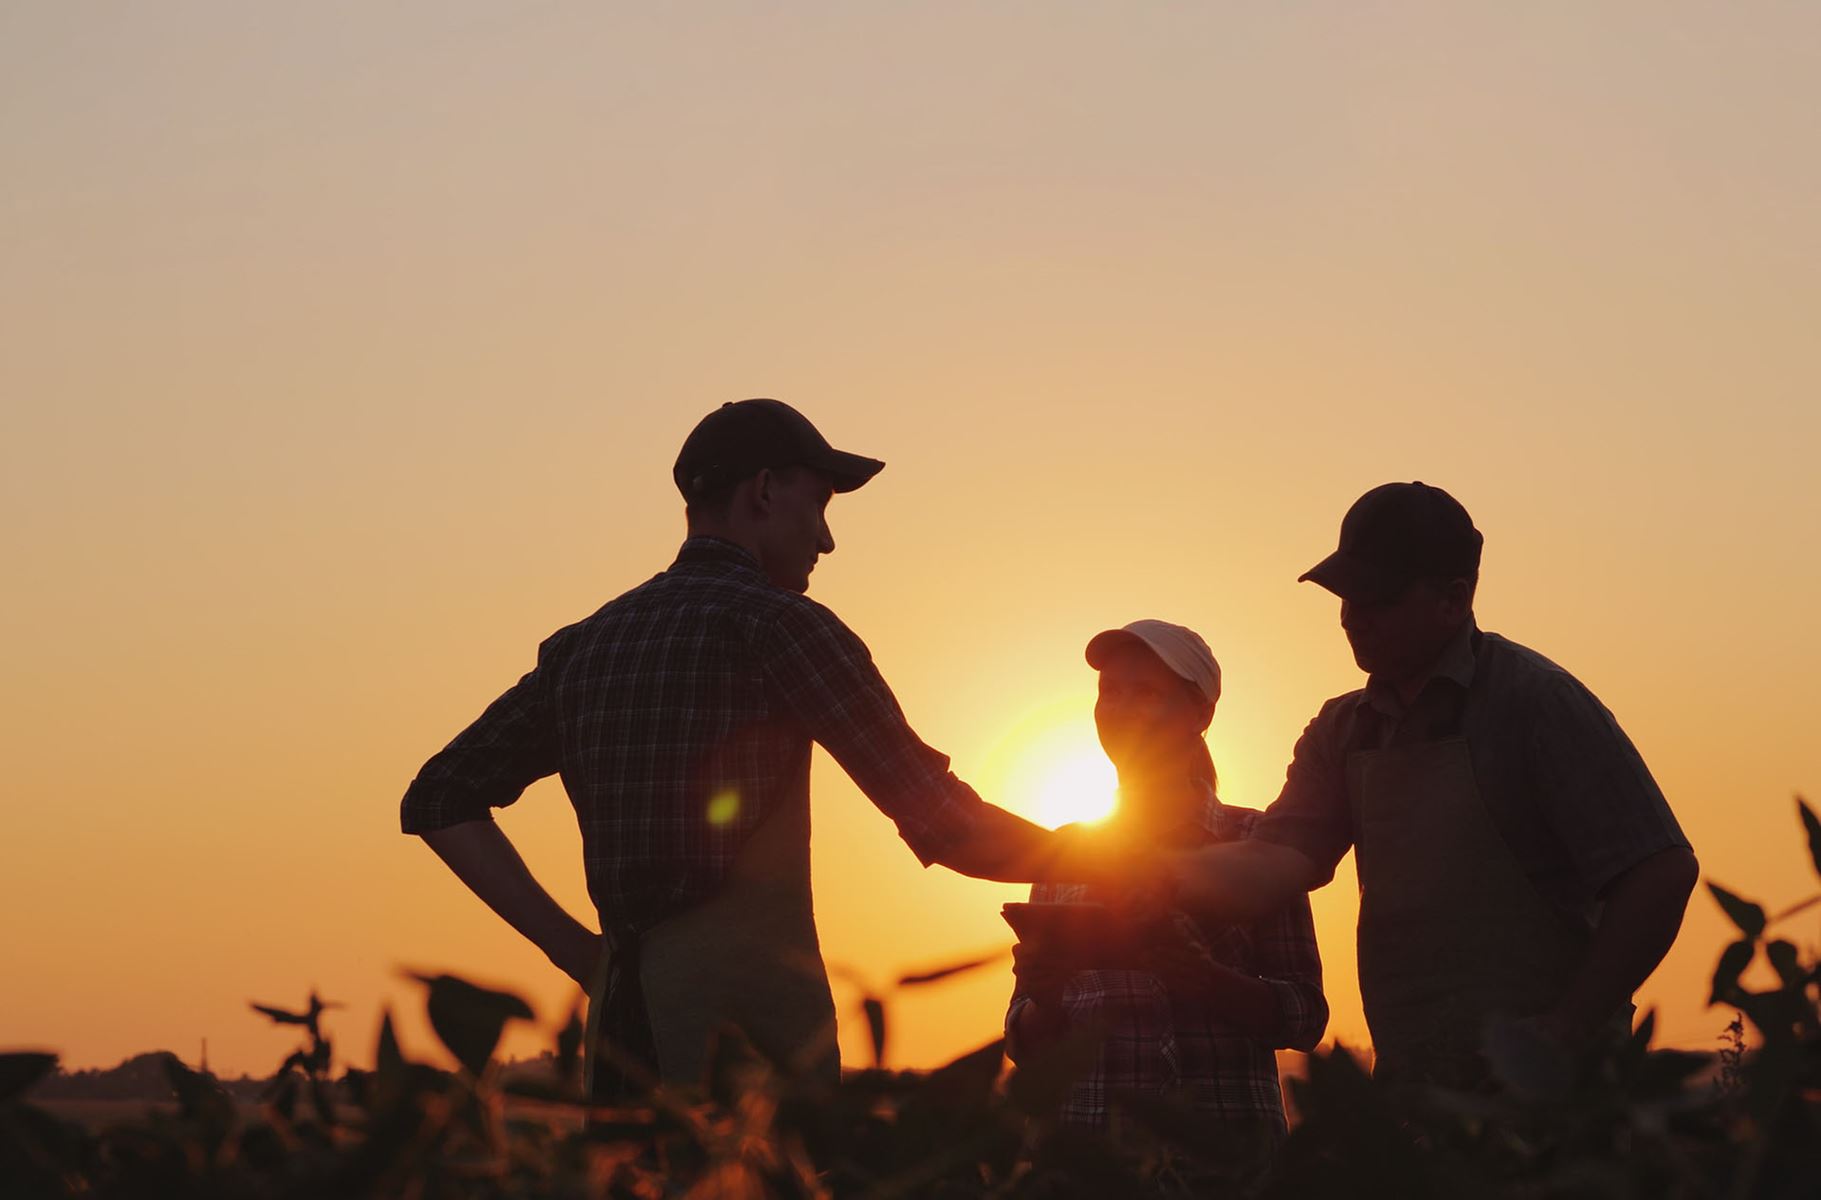 group of farmers shaking hands in a field